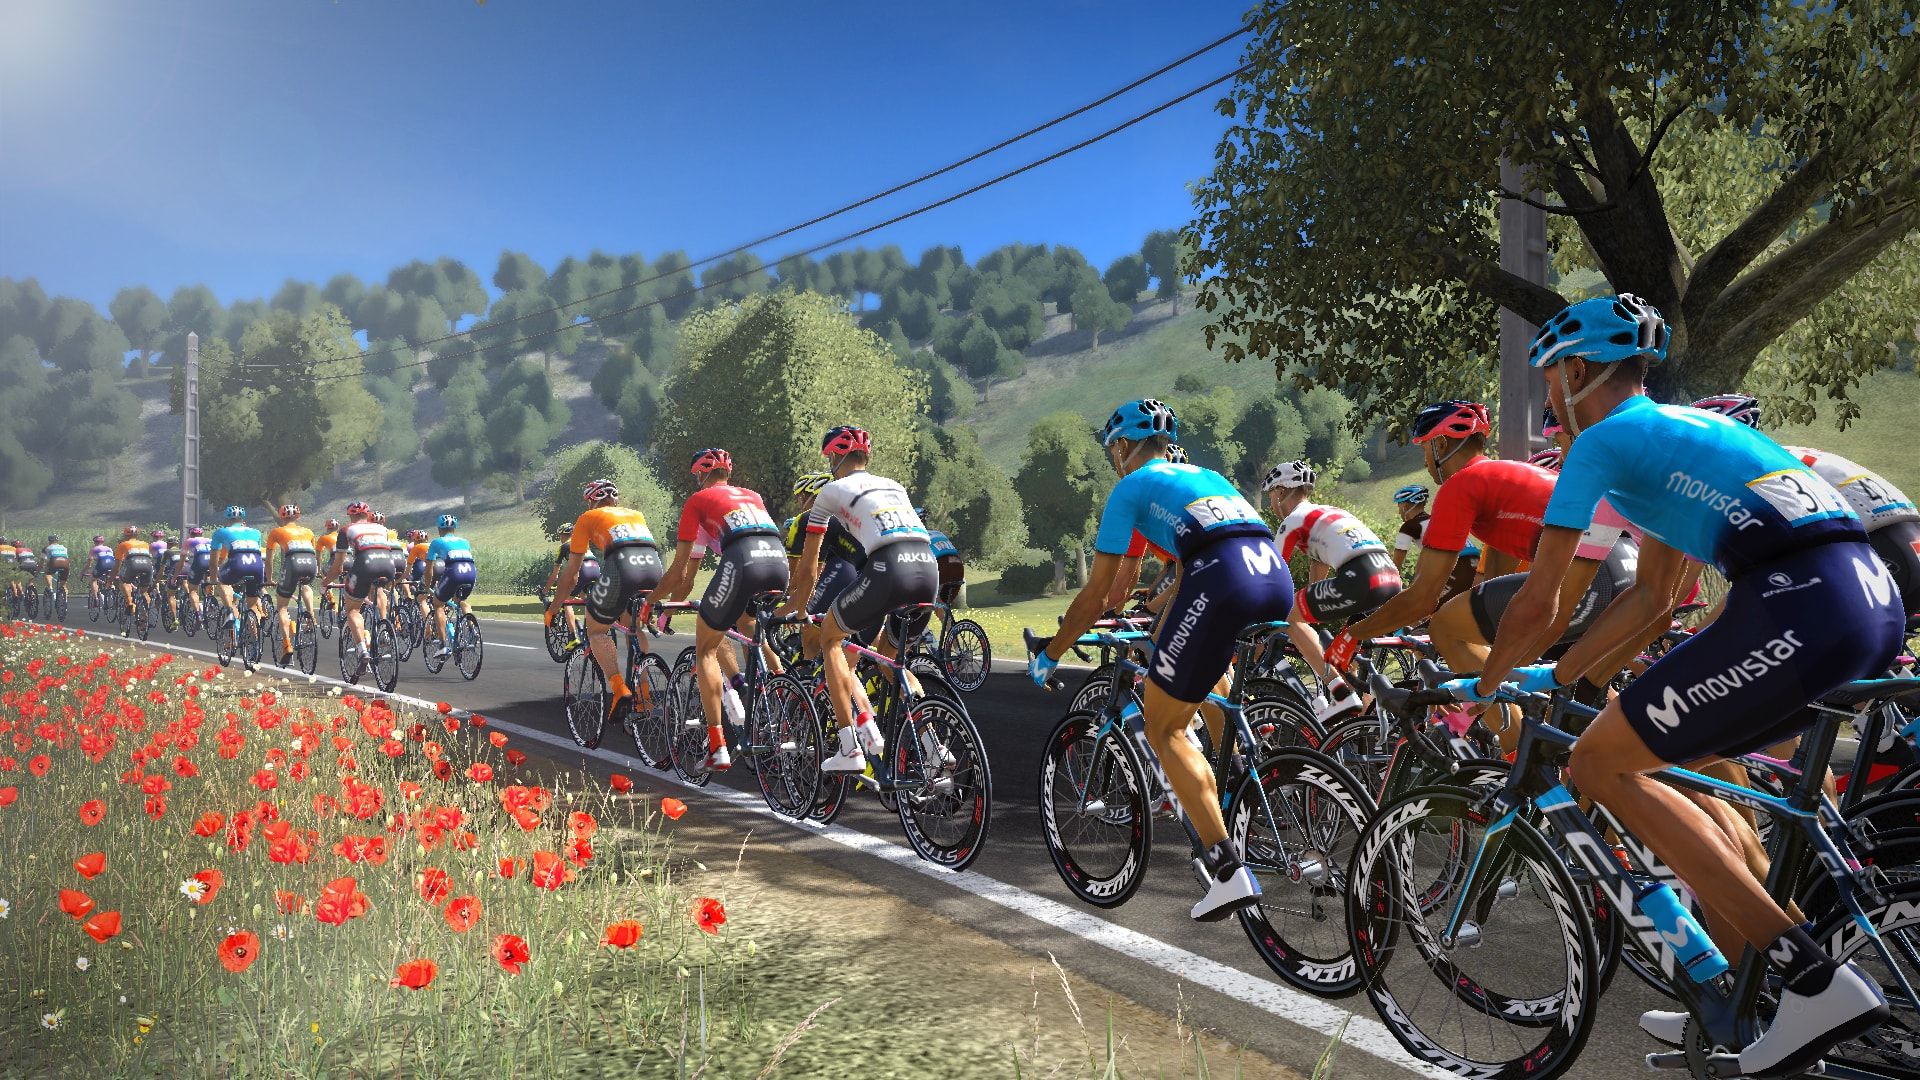 Tour de France Season 2019 Review. Bonus Stage is the world's leading source for Playstation Xbox Series X, Nintendo Switch, PC, Playstation Xbox One, 3DS, Wii U, Wii, Playstation